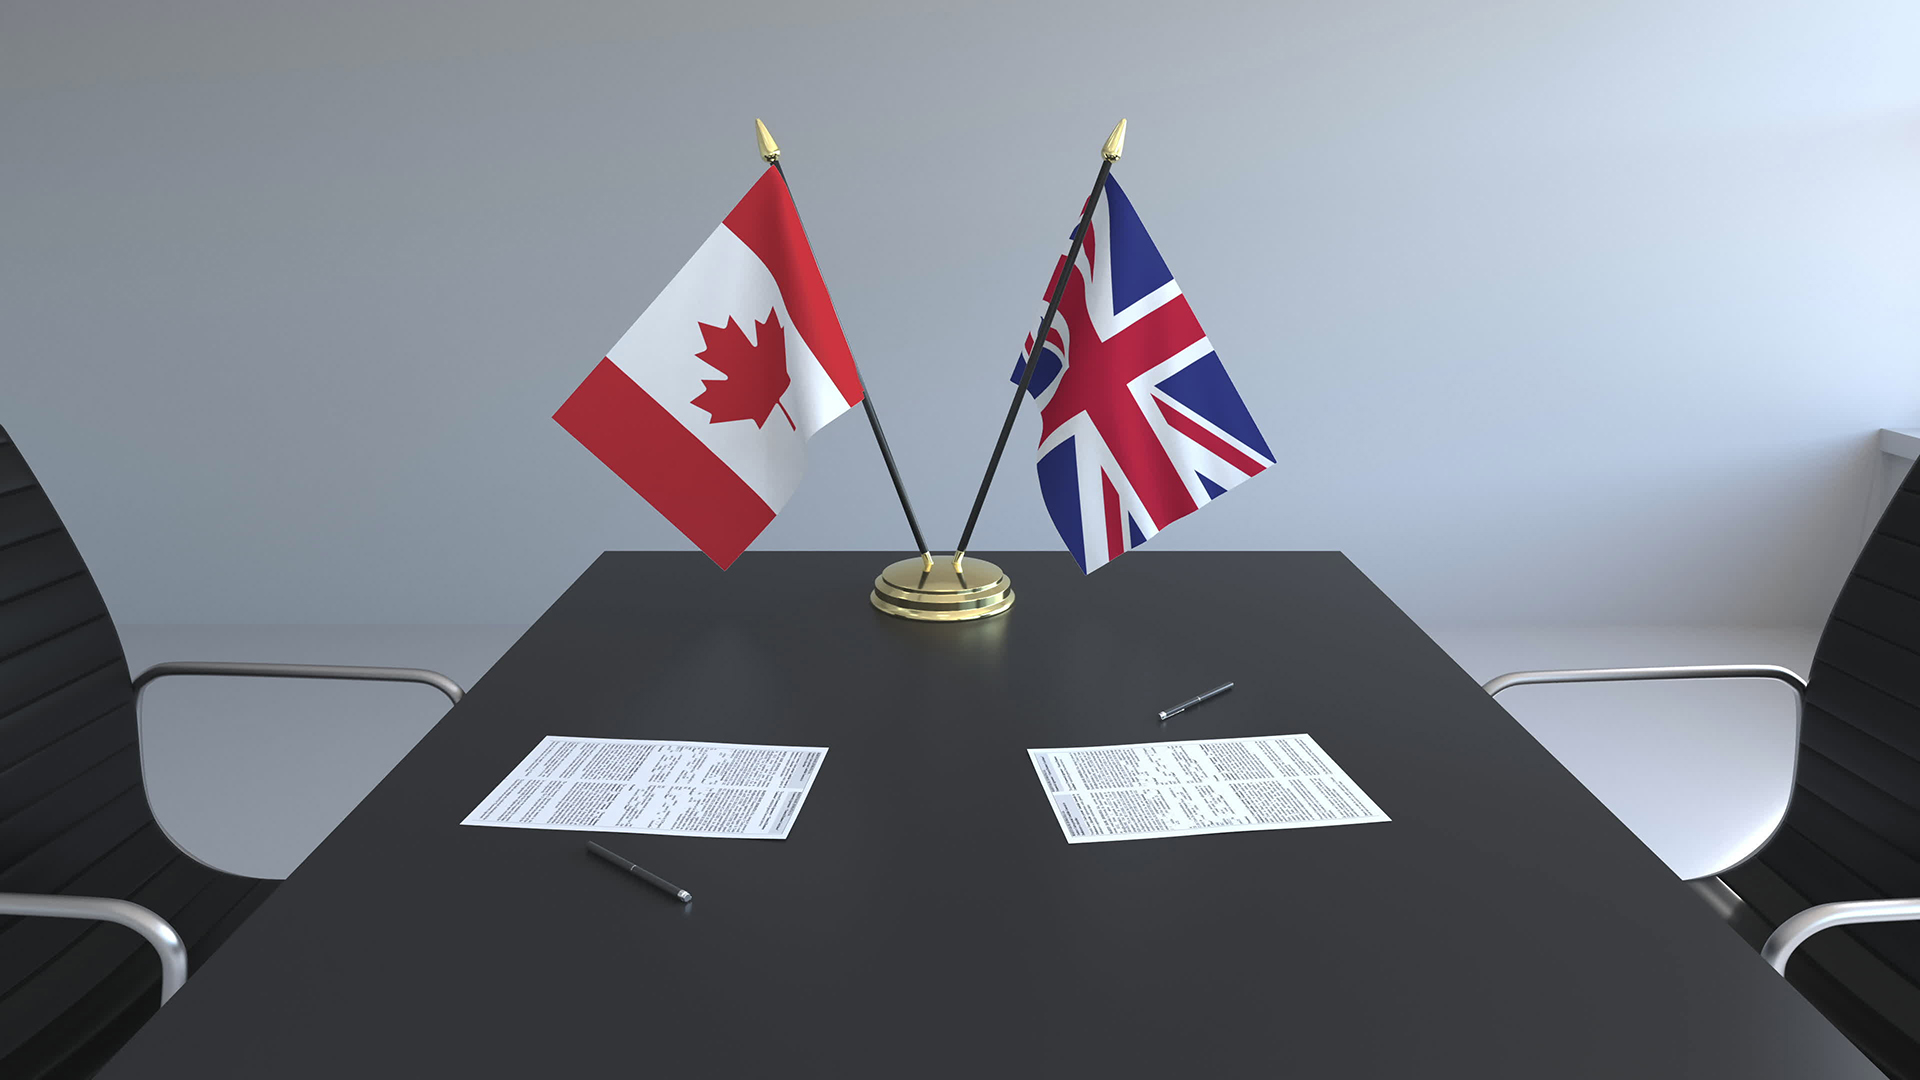 Green technology supply chains partnership struck between UK and Canada